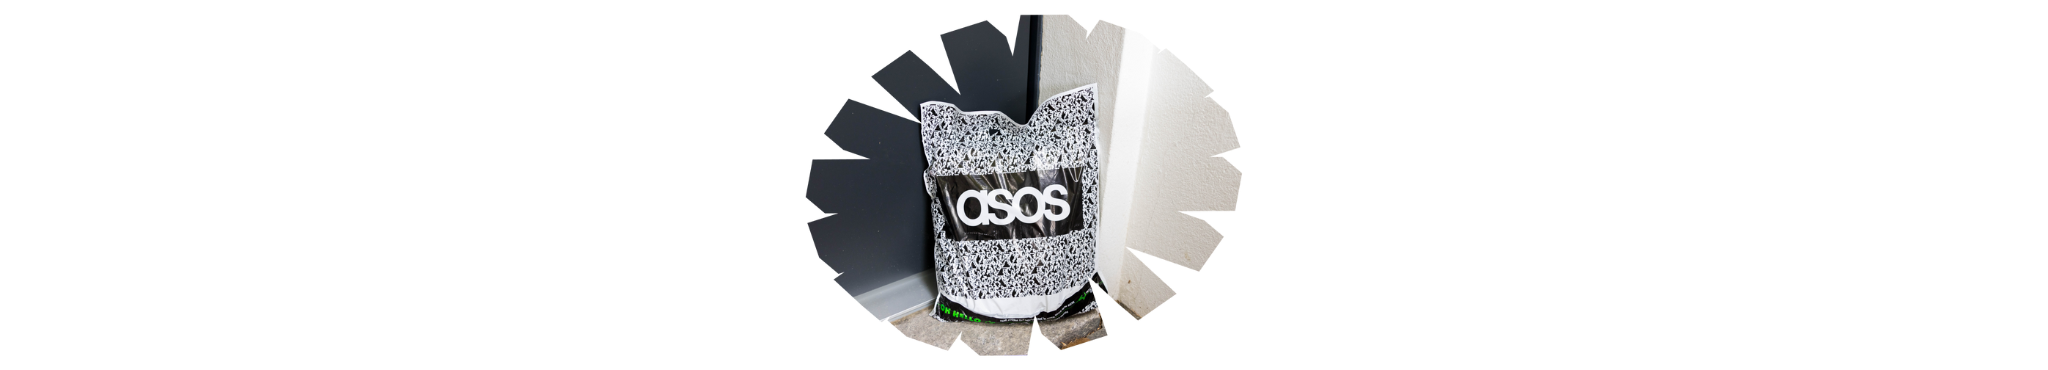 ASOS package on a step